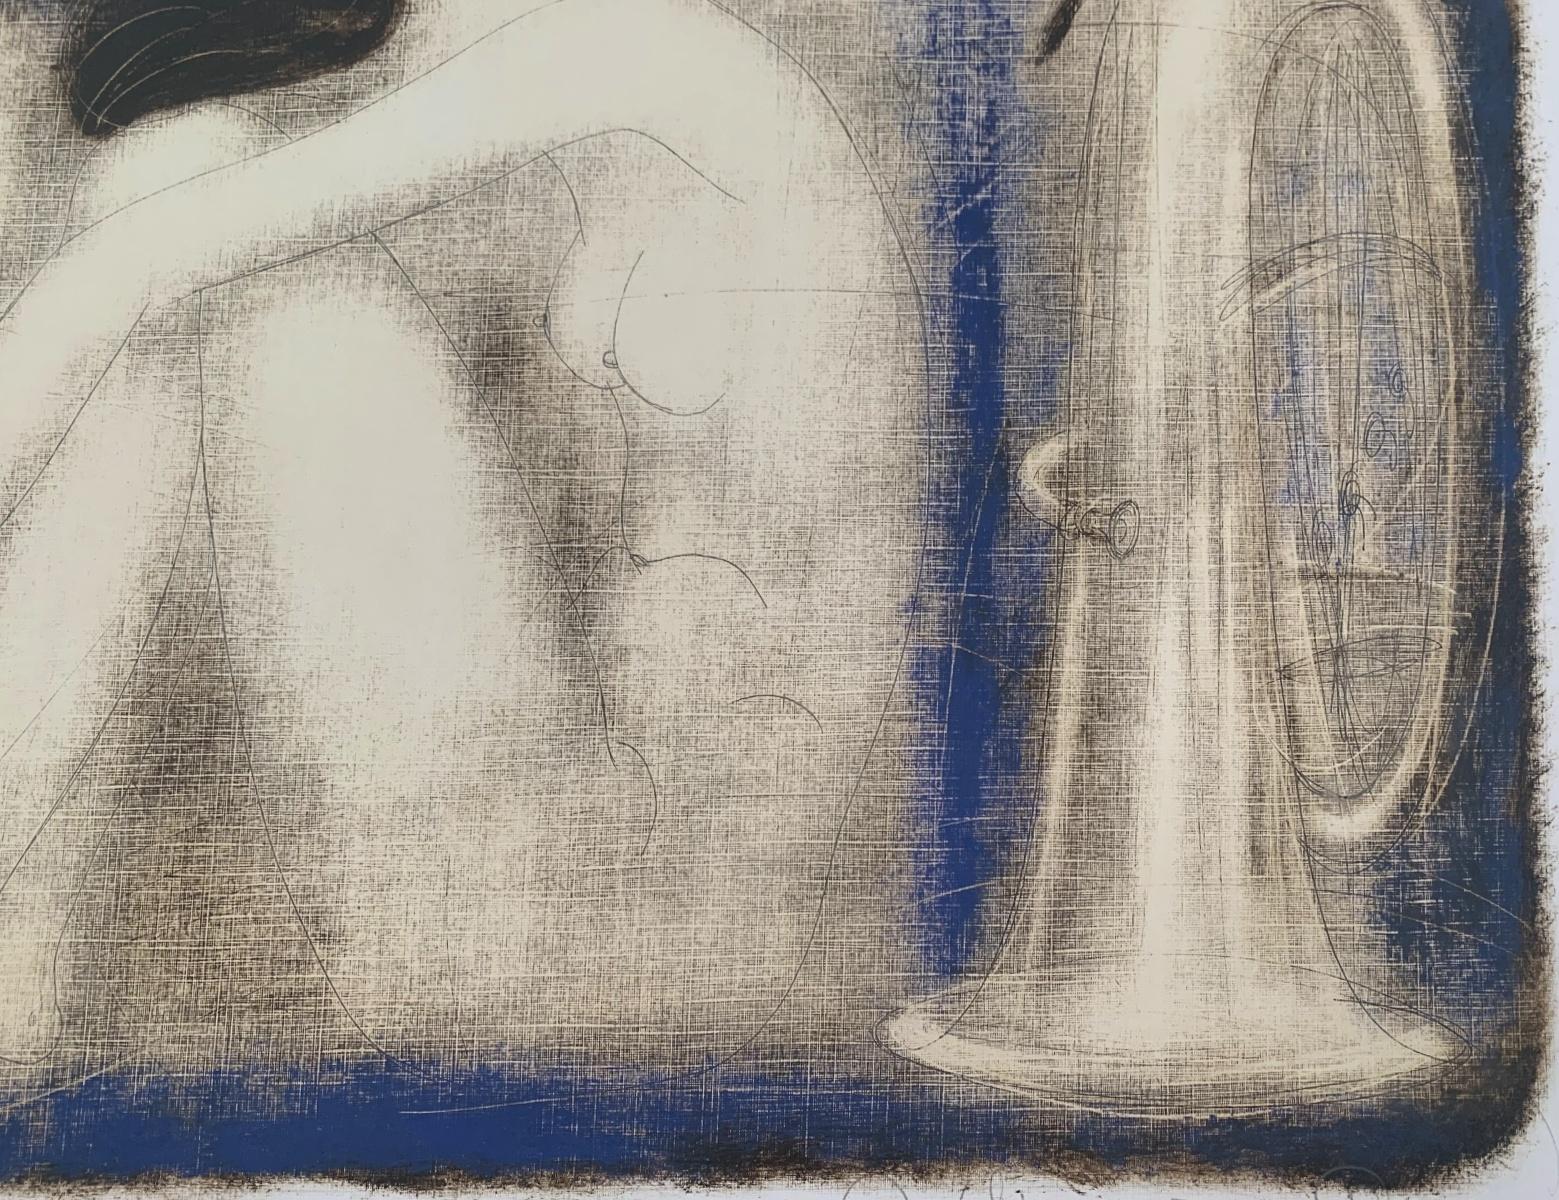 Contemporary figurative nude monotype print by Belarussian artist, Siergiej Timochow. Print depicts a woman with a tube. The composition is monochromatic in blue. The paper/cardboard is textured. 

Siergiej Timochow (b. in 1960)
He studied at an art